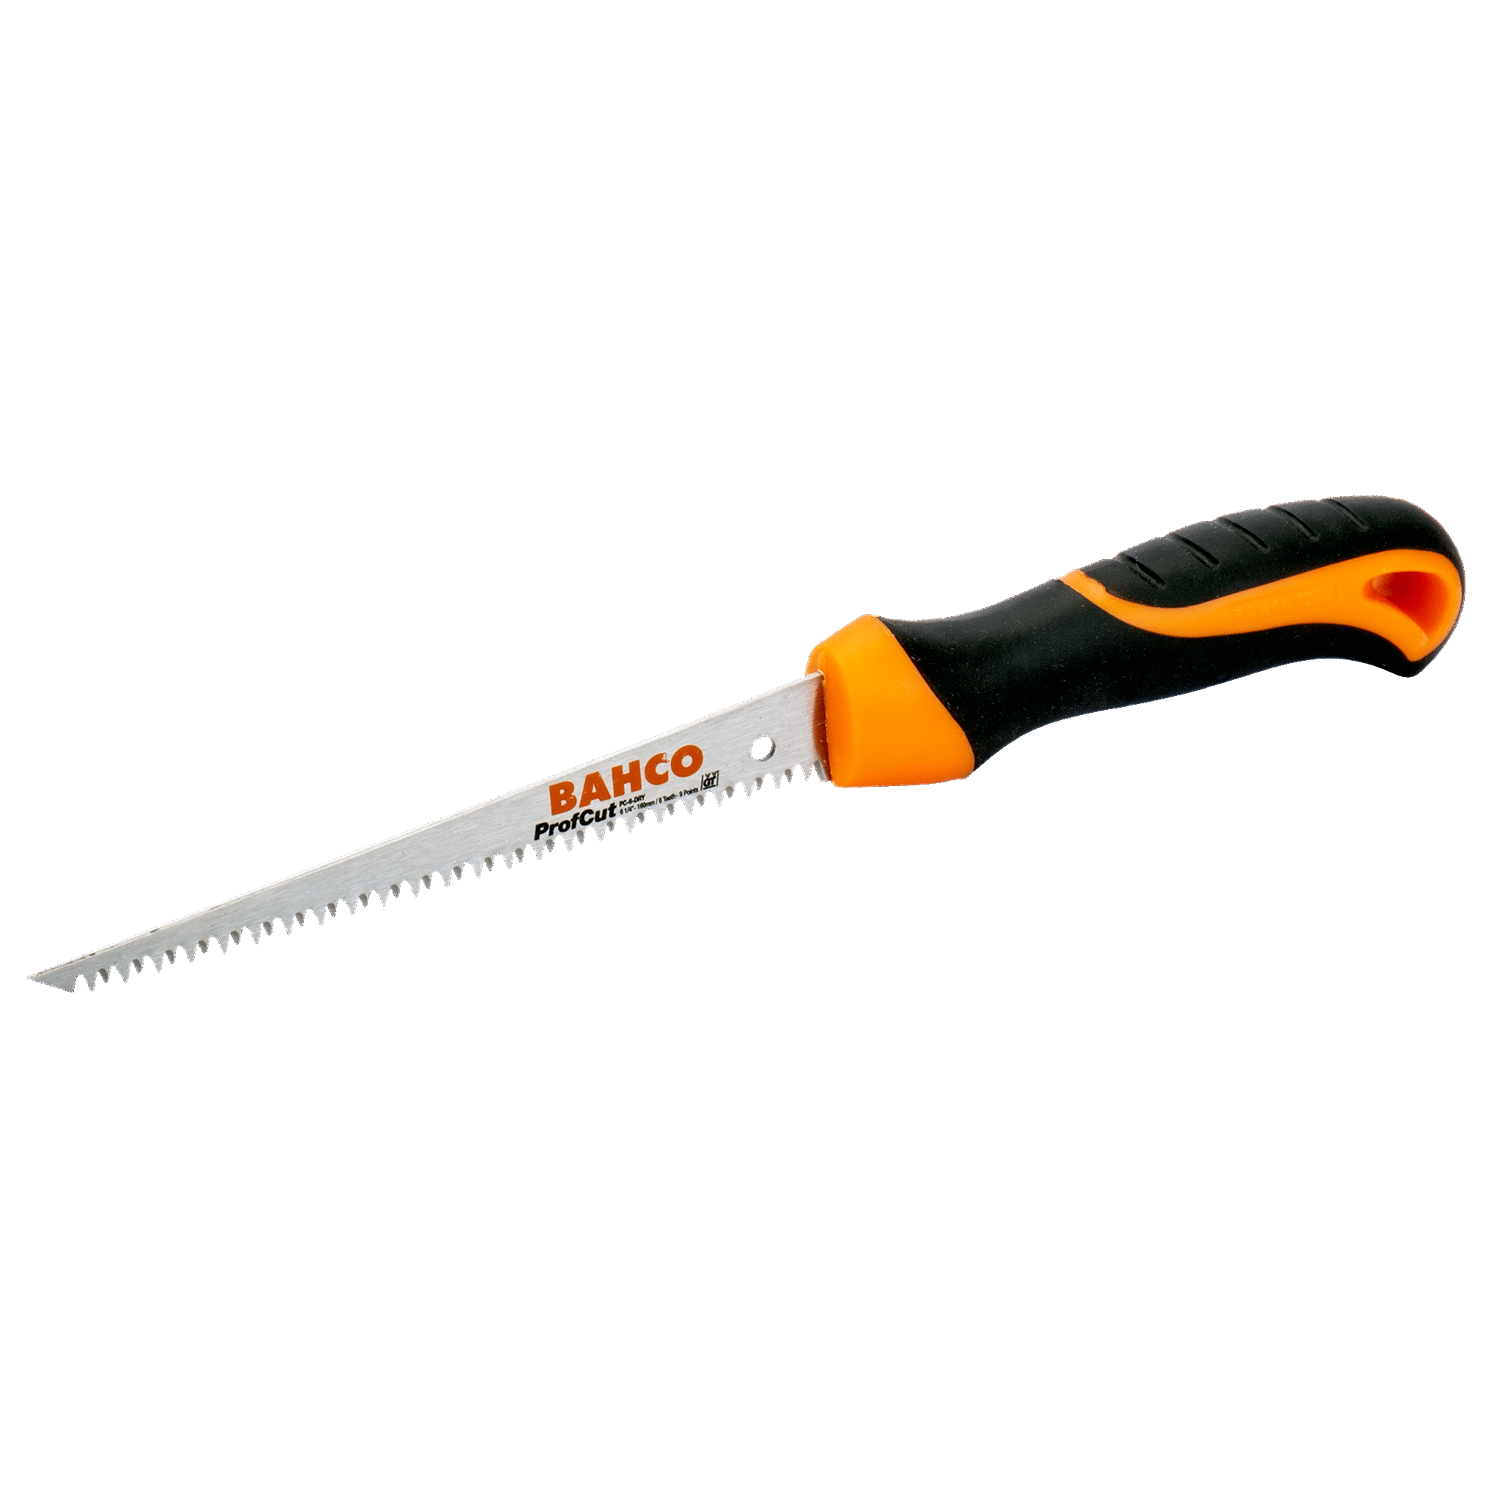 BAHCO PC-6-DRY Compass Saw for Plaster/Drywall of Wood Material - Premium Compass Saw from BAHCO - Shop now at Yew Aik.